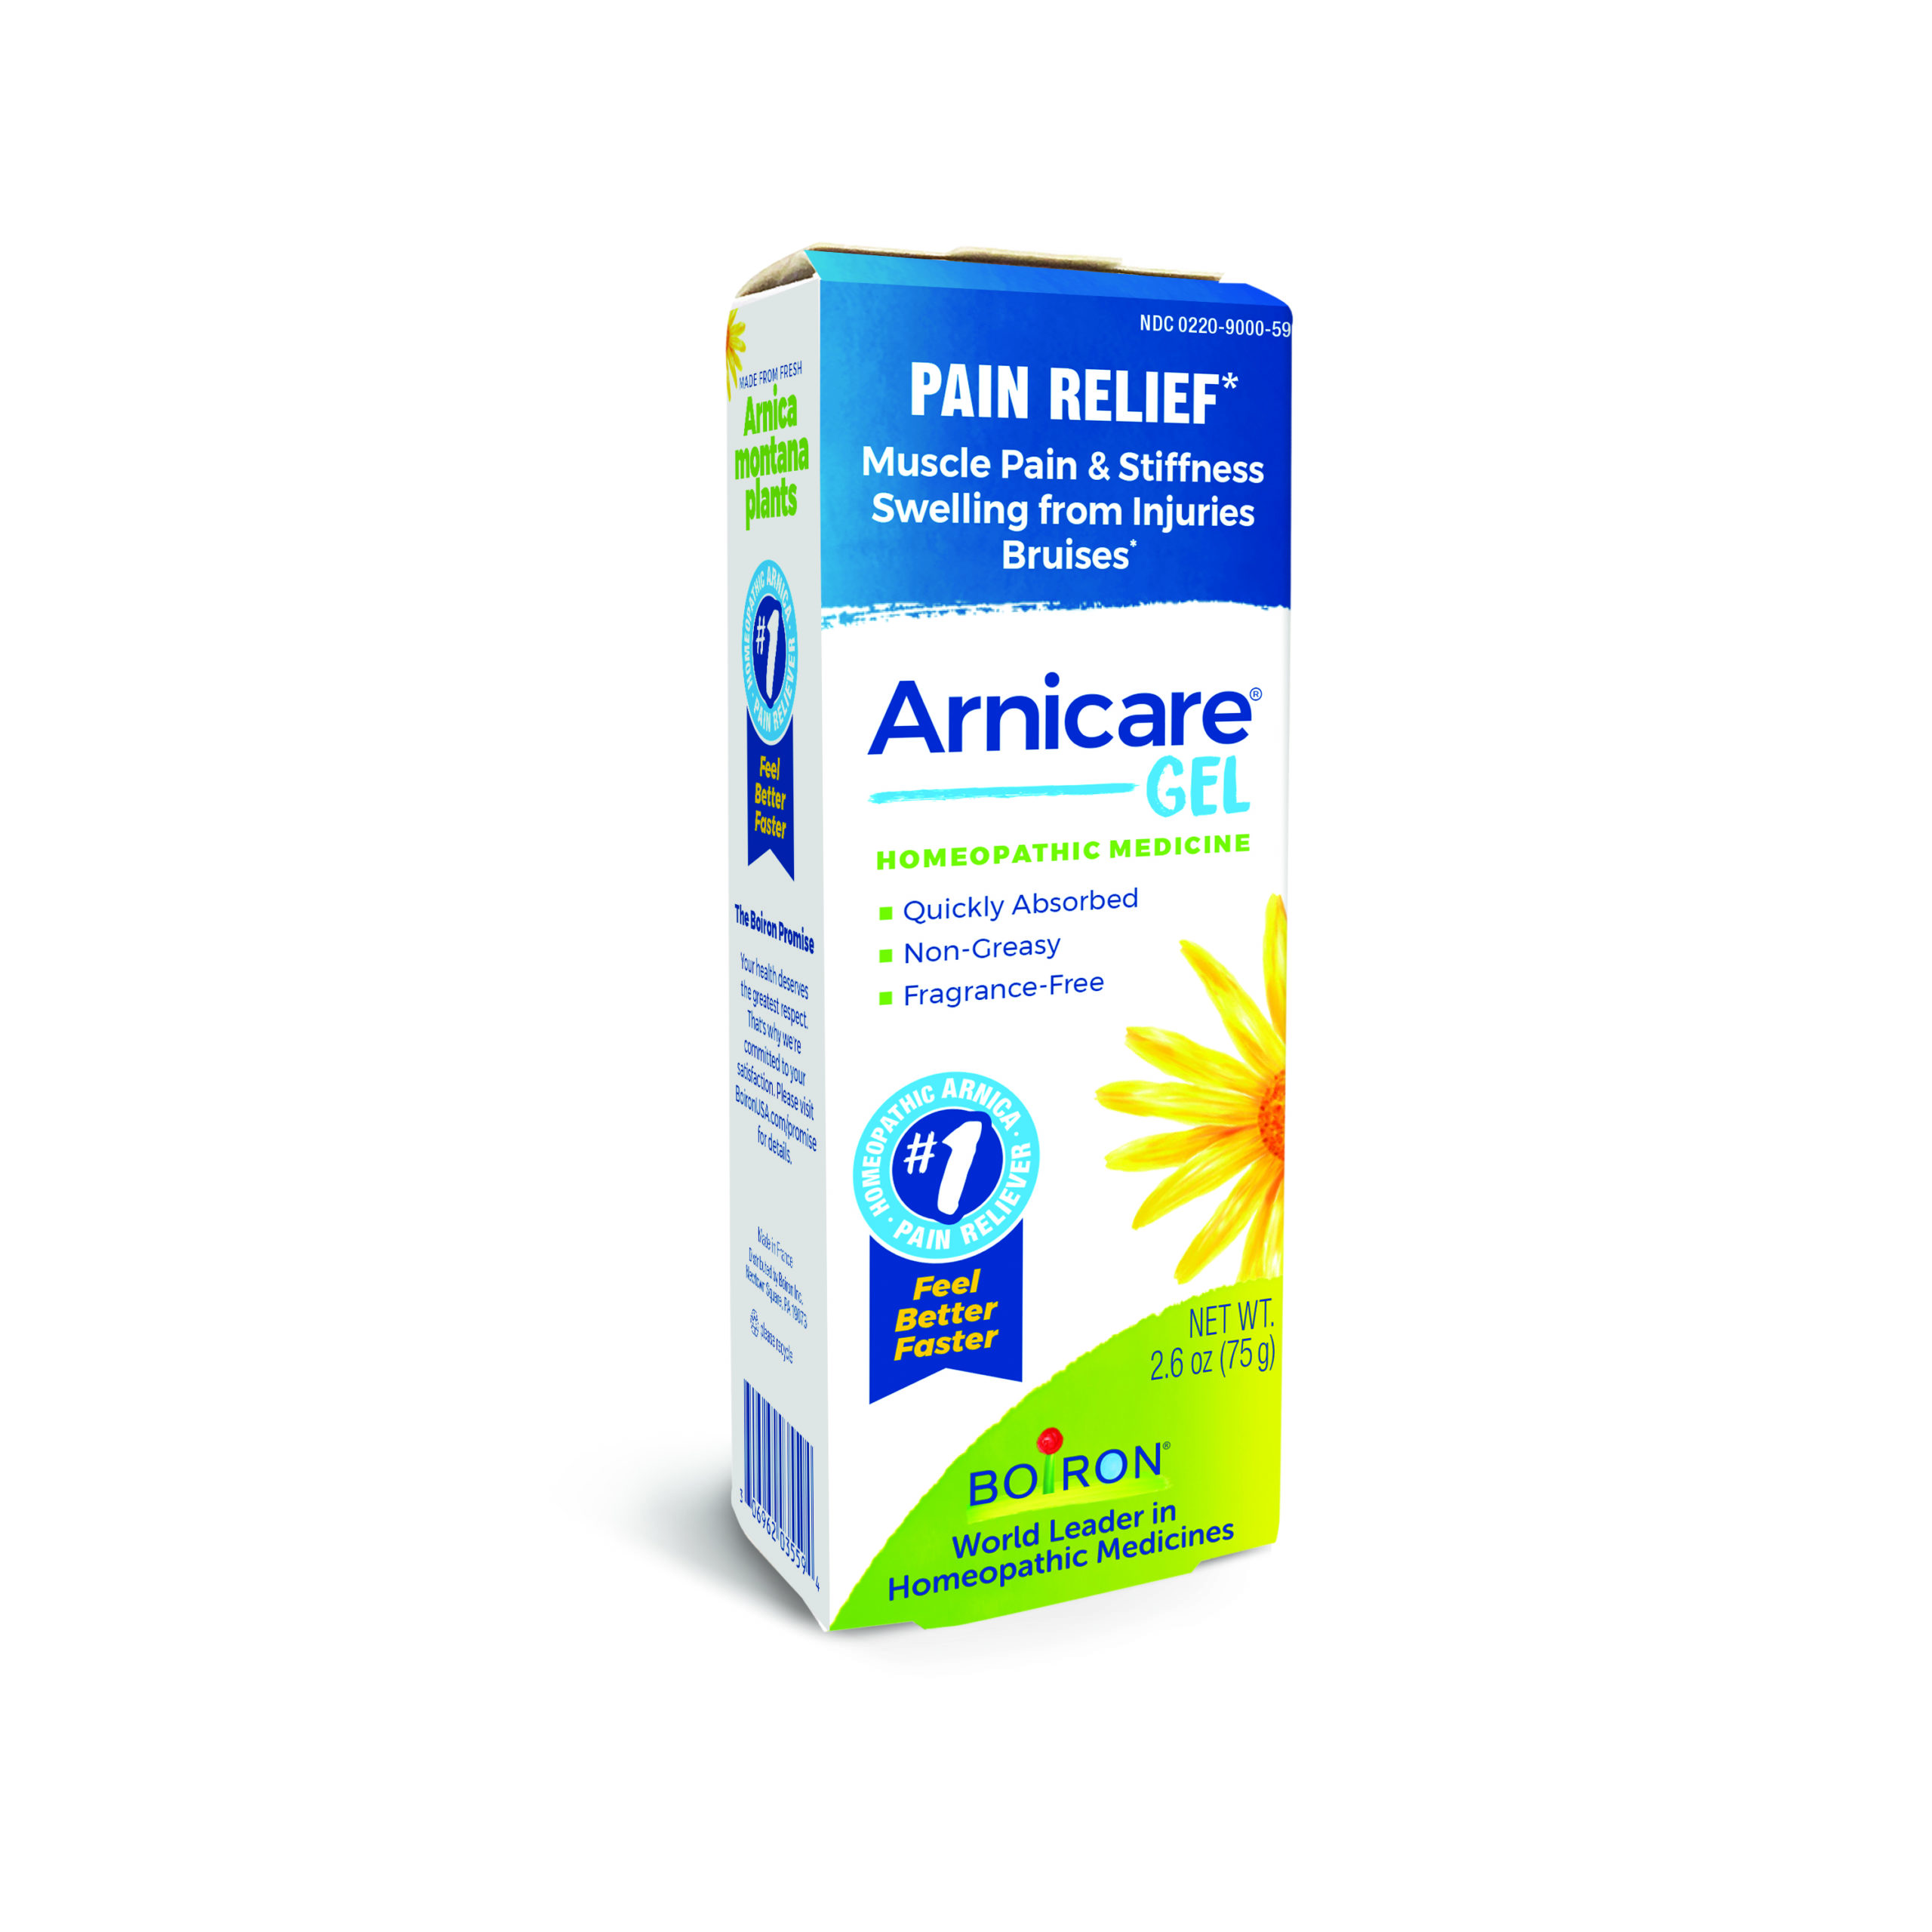 Arnicare® Gel for Muscle Pain Relief | Boiron USA